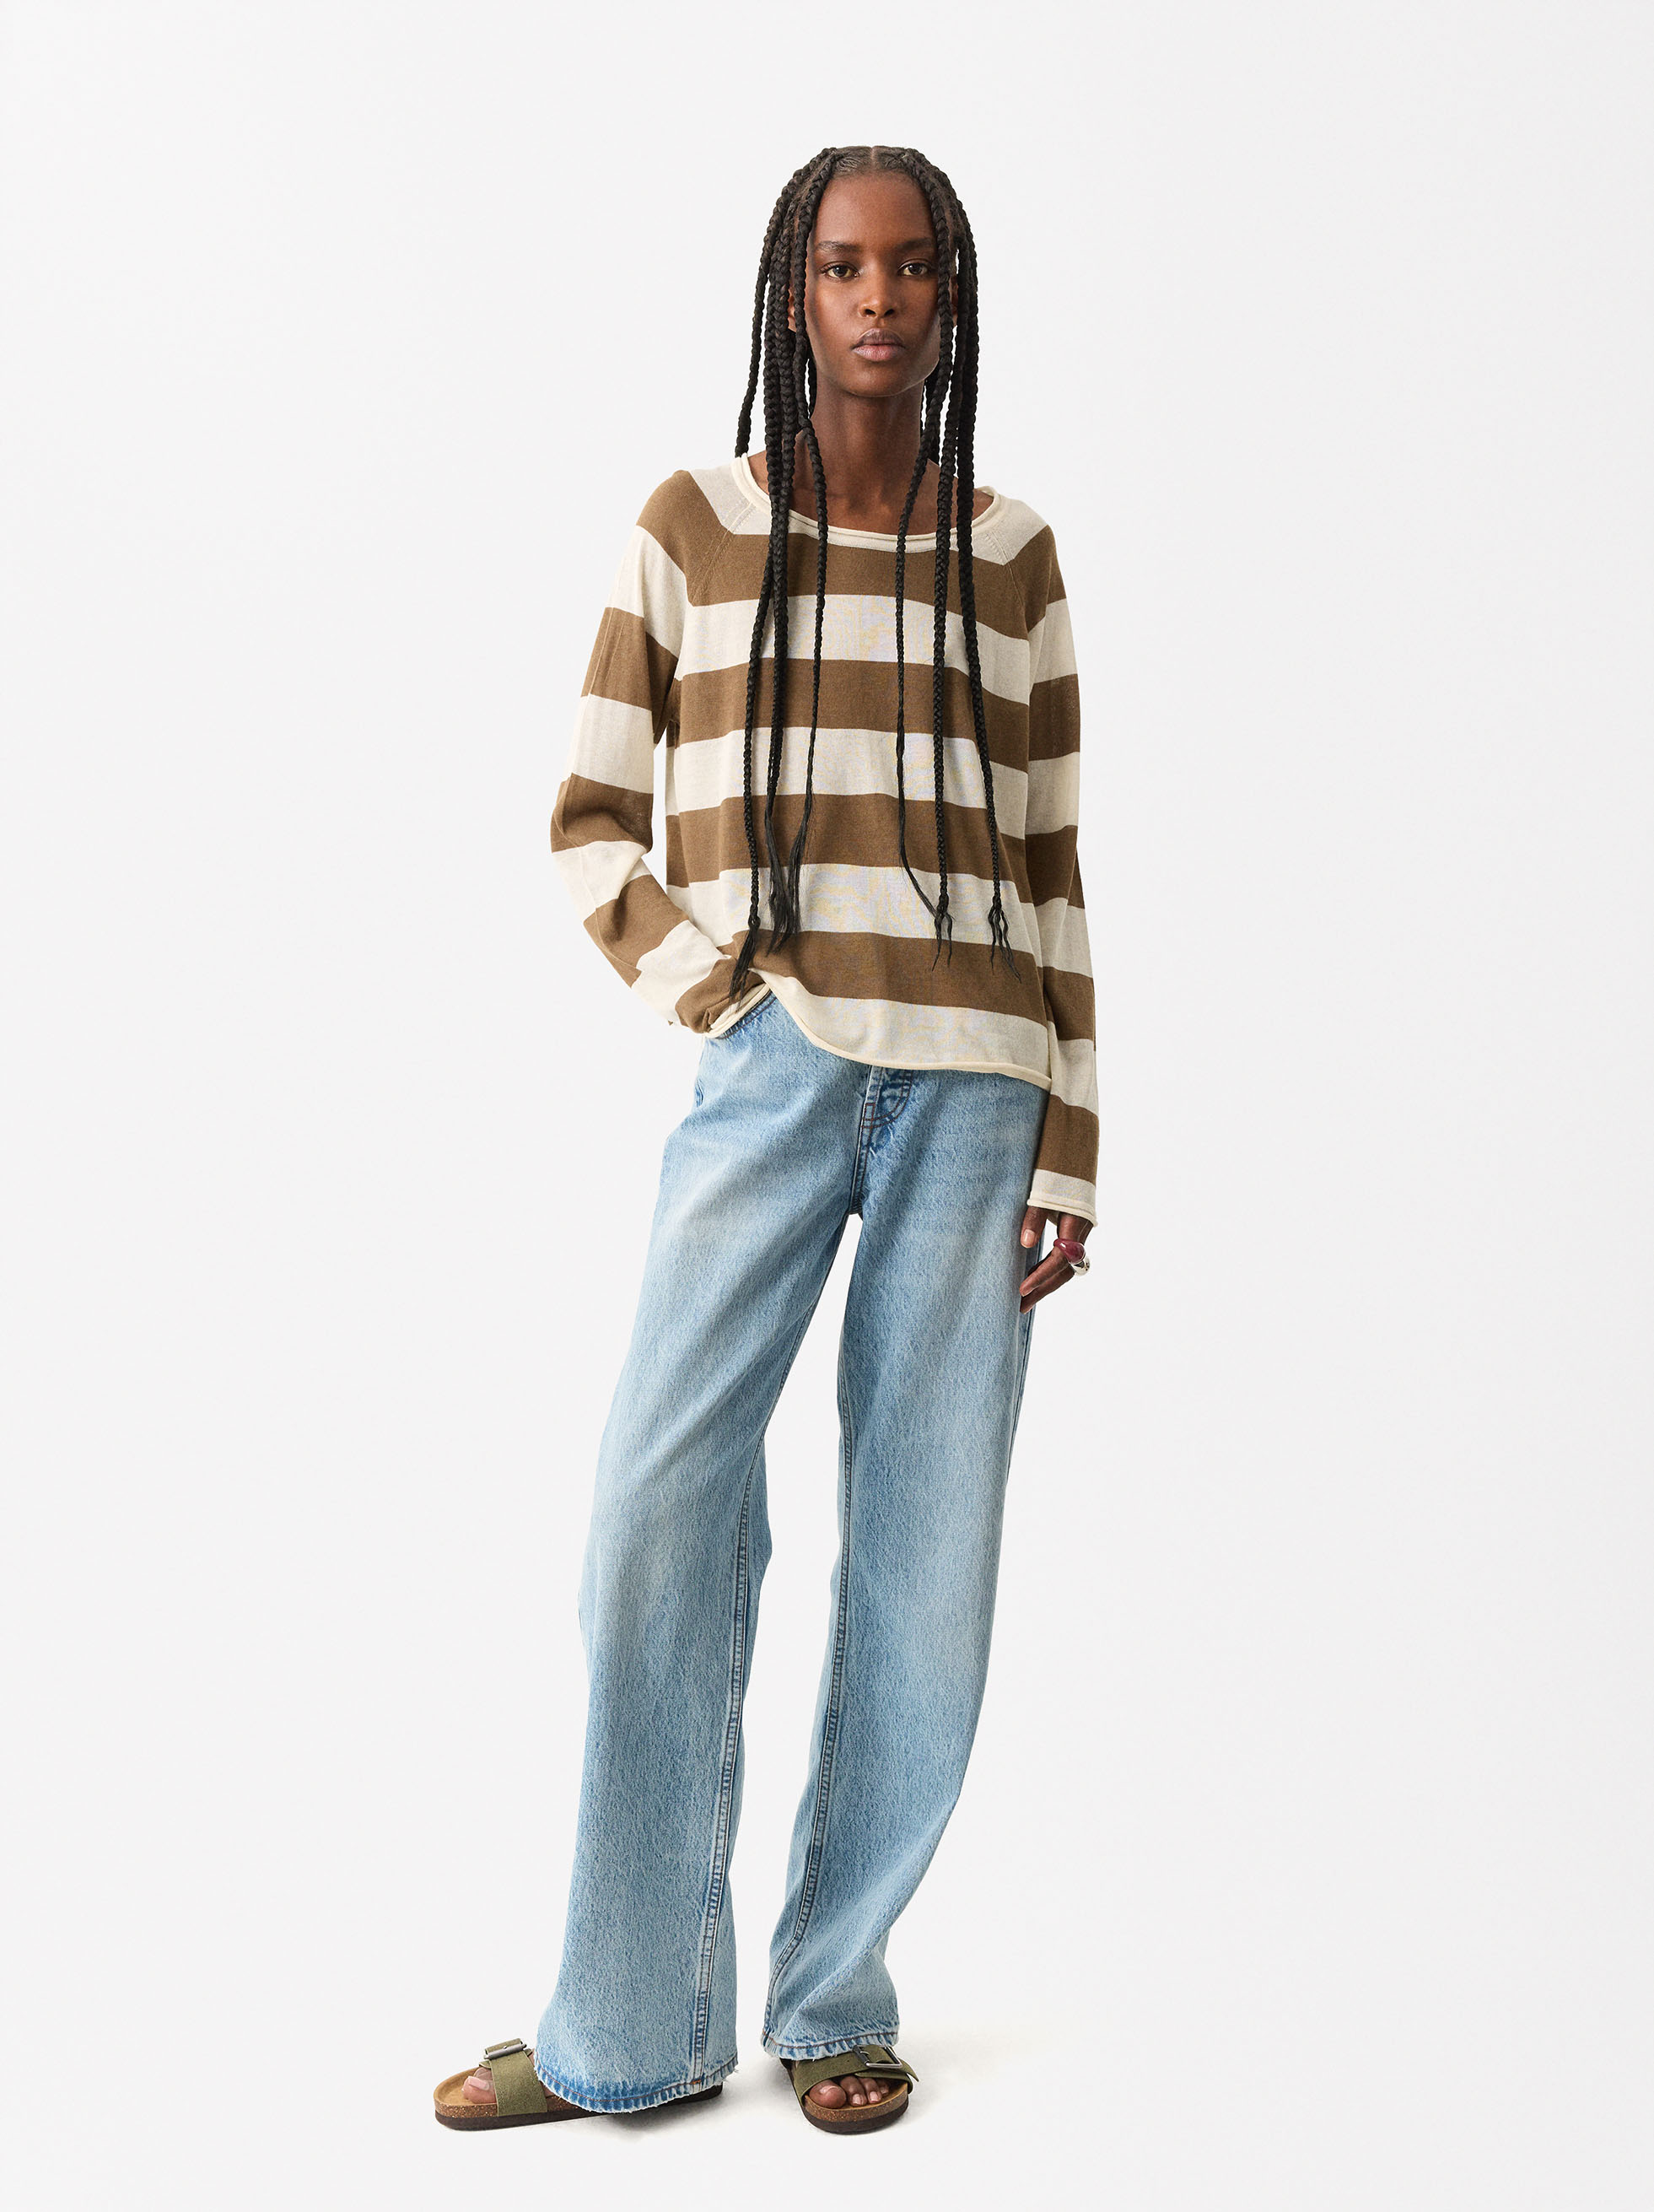 Striped Knit Sweater image number 5.0